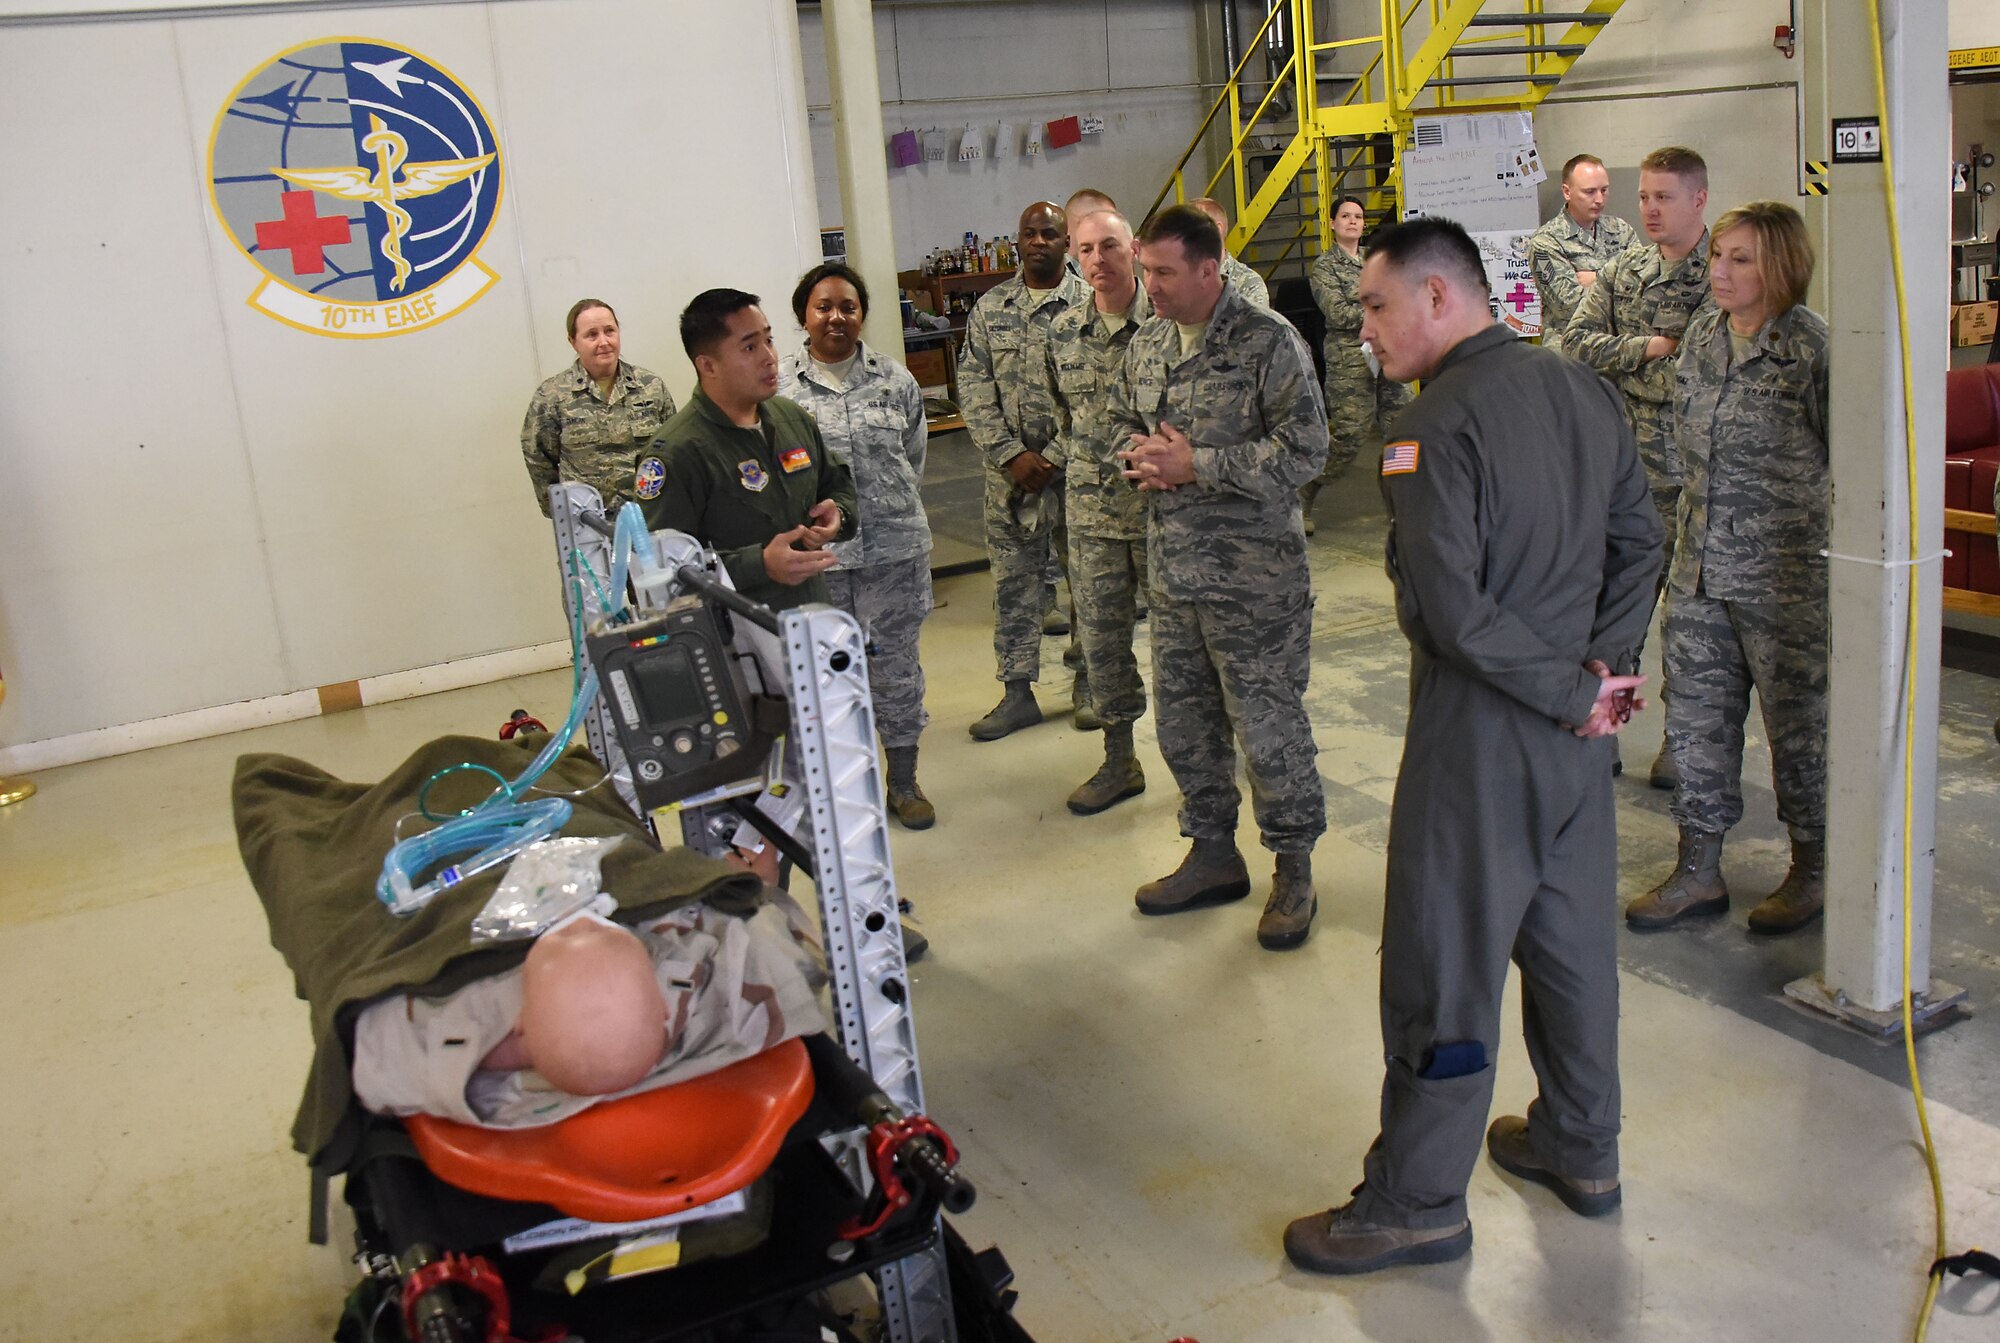 Airmen with the 313th Expeditionary Operations Support Squadron brief Maj. Gen. Christopher Bence, commander, USAF Expeditionary Center and Command Chief Master Sgt. Larry Williams, USAF EC command chief, on how they care for aeromedical evacuation patients at Ramstein Air Base, Germany, Nov. 2, 2017. Bence and Williams along with the 521st Air Mobility Operations Wing leadership team visited six squadrons of the 521st AMOW at Ramstein AB and Spangdahlem AB, Germany, Aviano AB, Italy and RAF Mildenhall, U.K. (U.S. Air Force photo by Tech. Sgt. Jamie Powell)